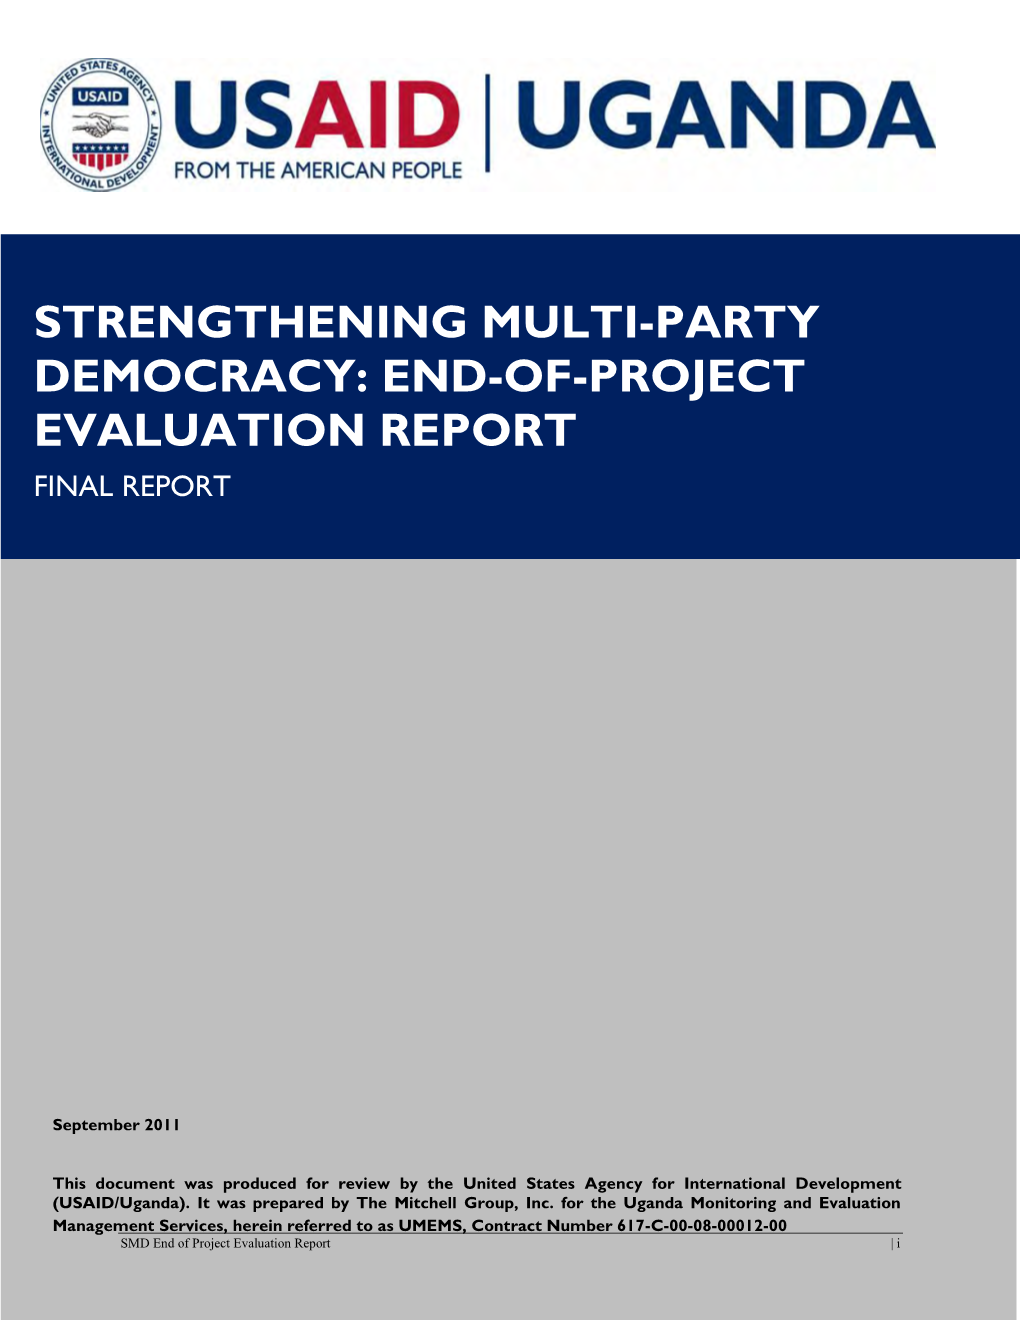 Strengthening Multi-Party Democracy: End-Of-Project Evaluation Report Final Report